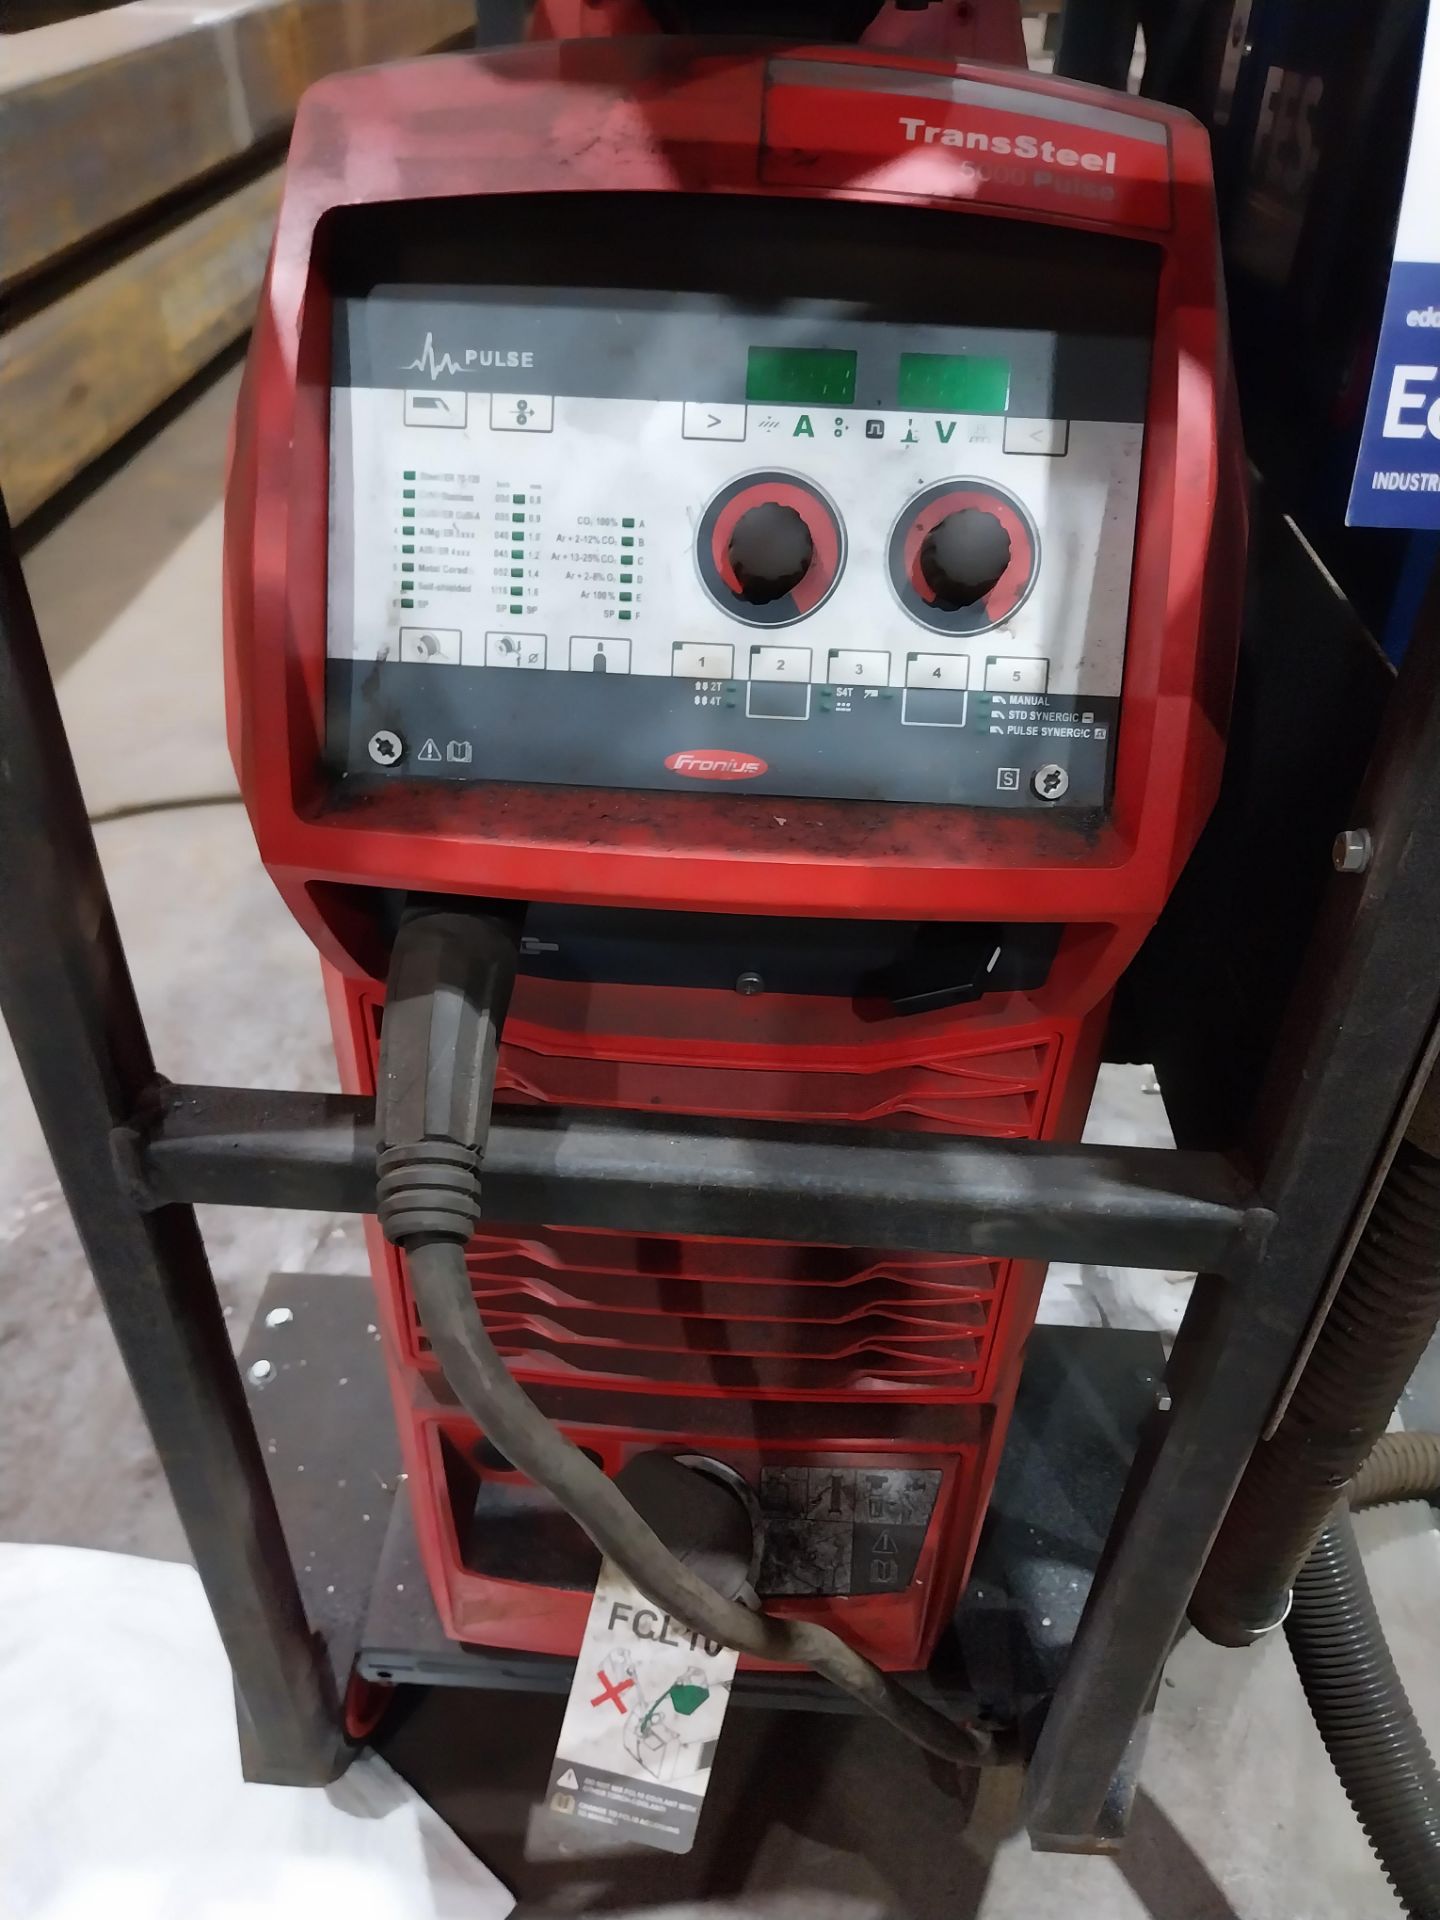 Fronius Transsteel 5000 Pulse mig welder with VR5000 wire feed, FES-200 W3 extractor, torch and - Image 3 of 8